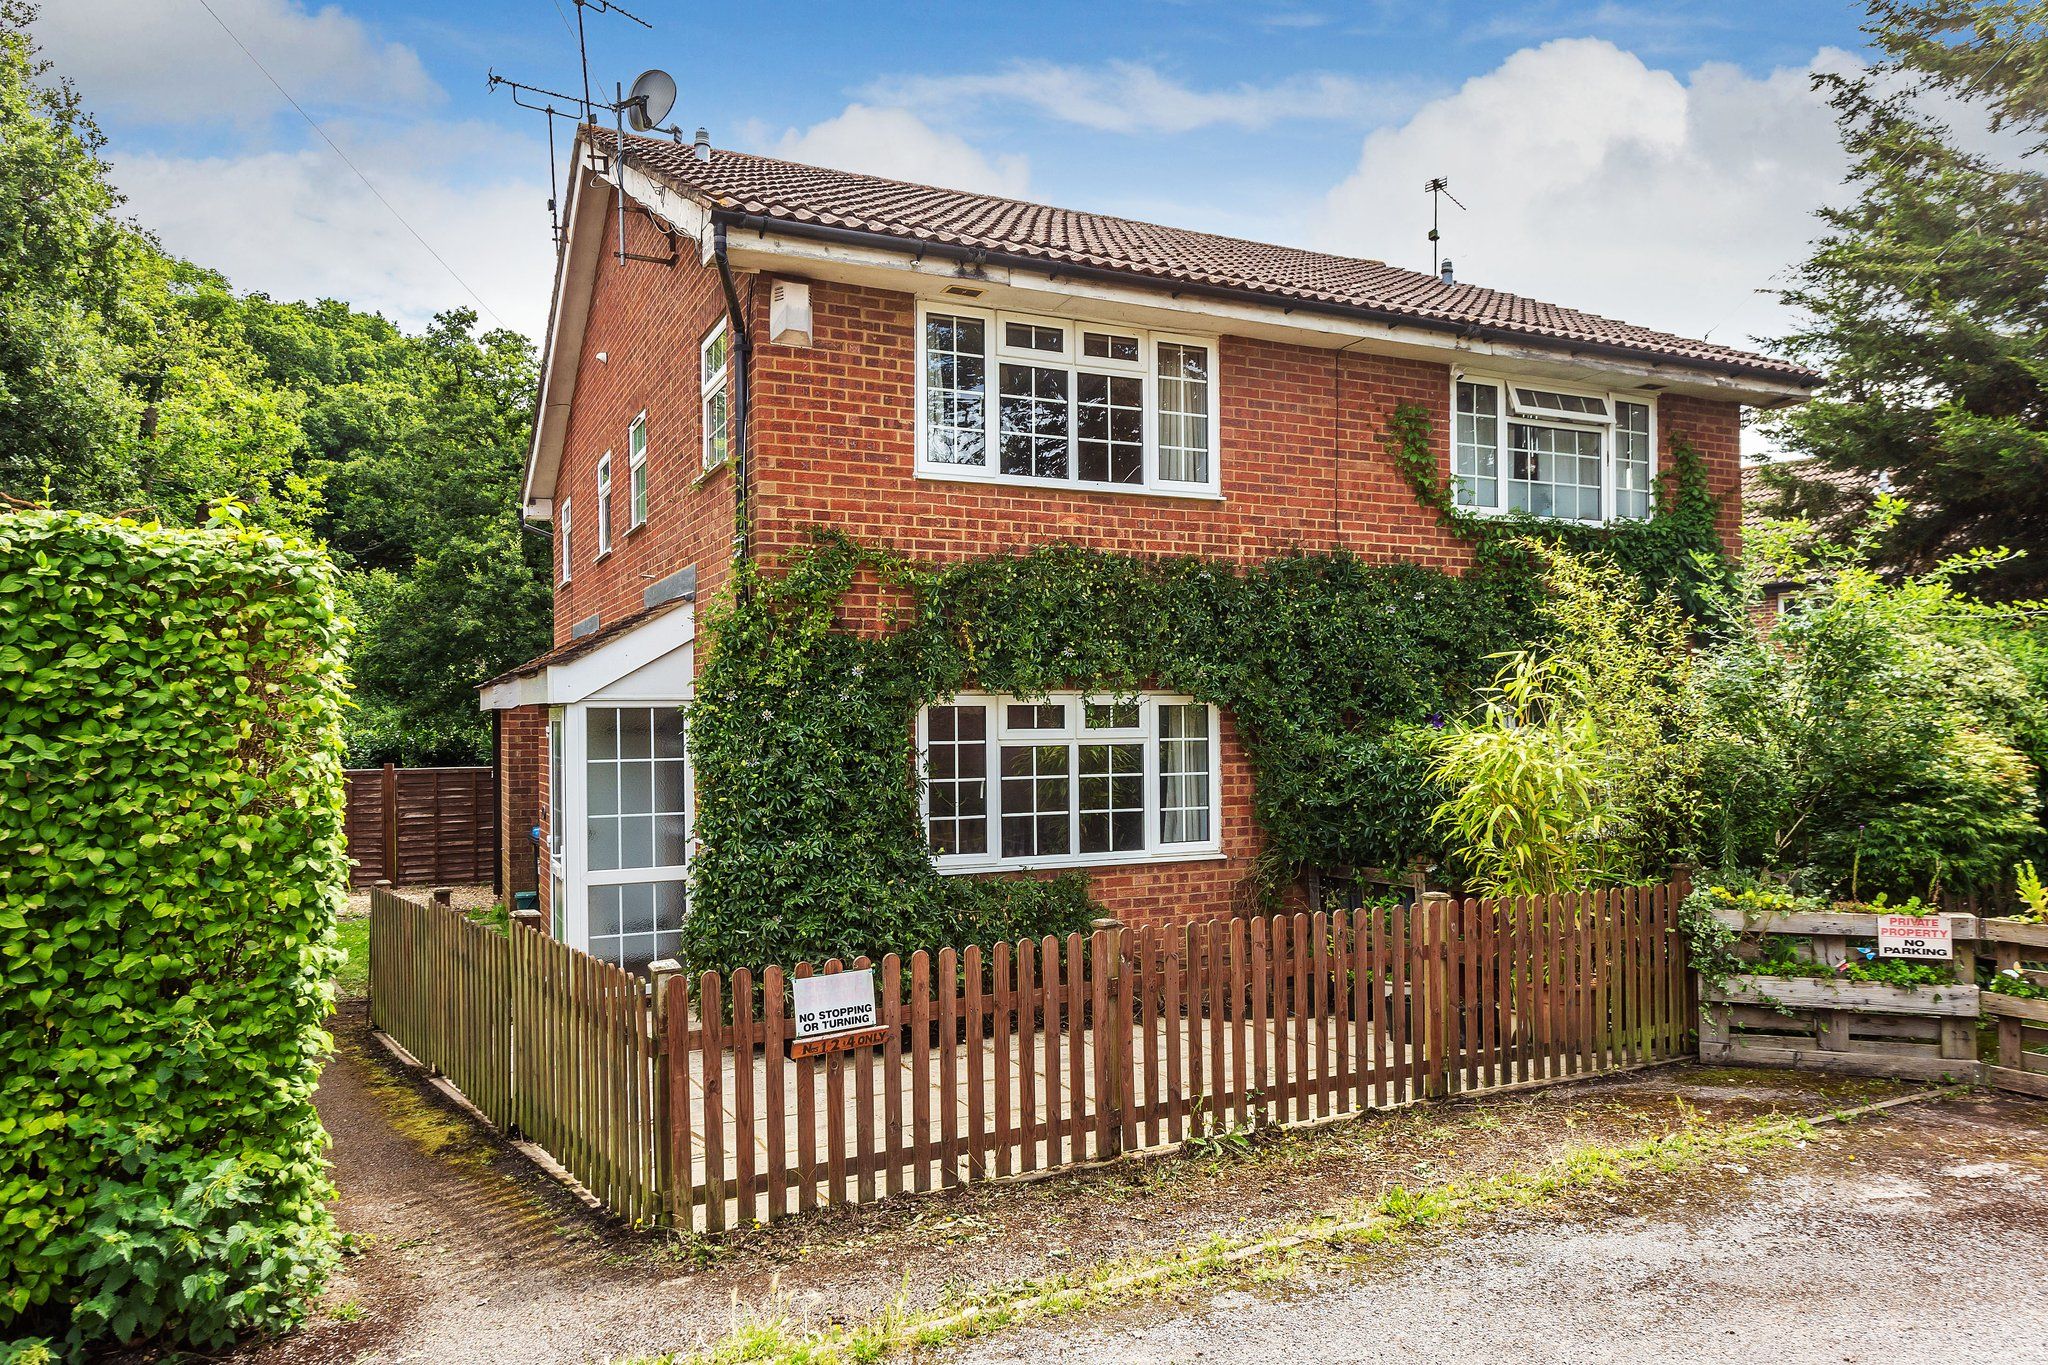 Holland Crescent, Oxted, Surrey, RH8 9NL